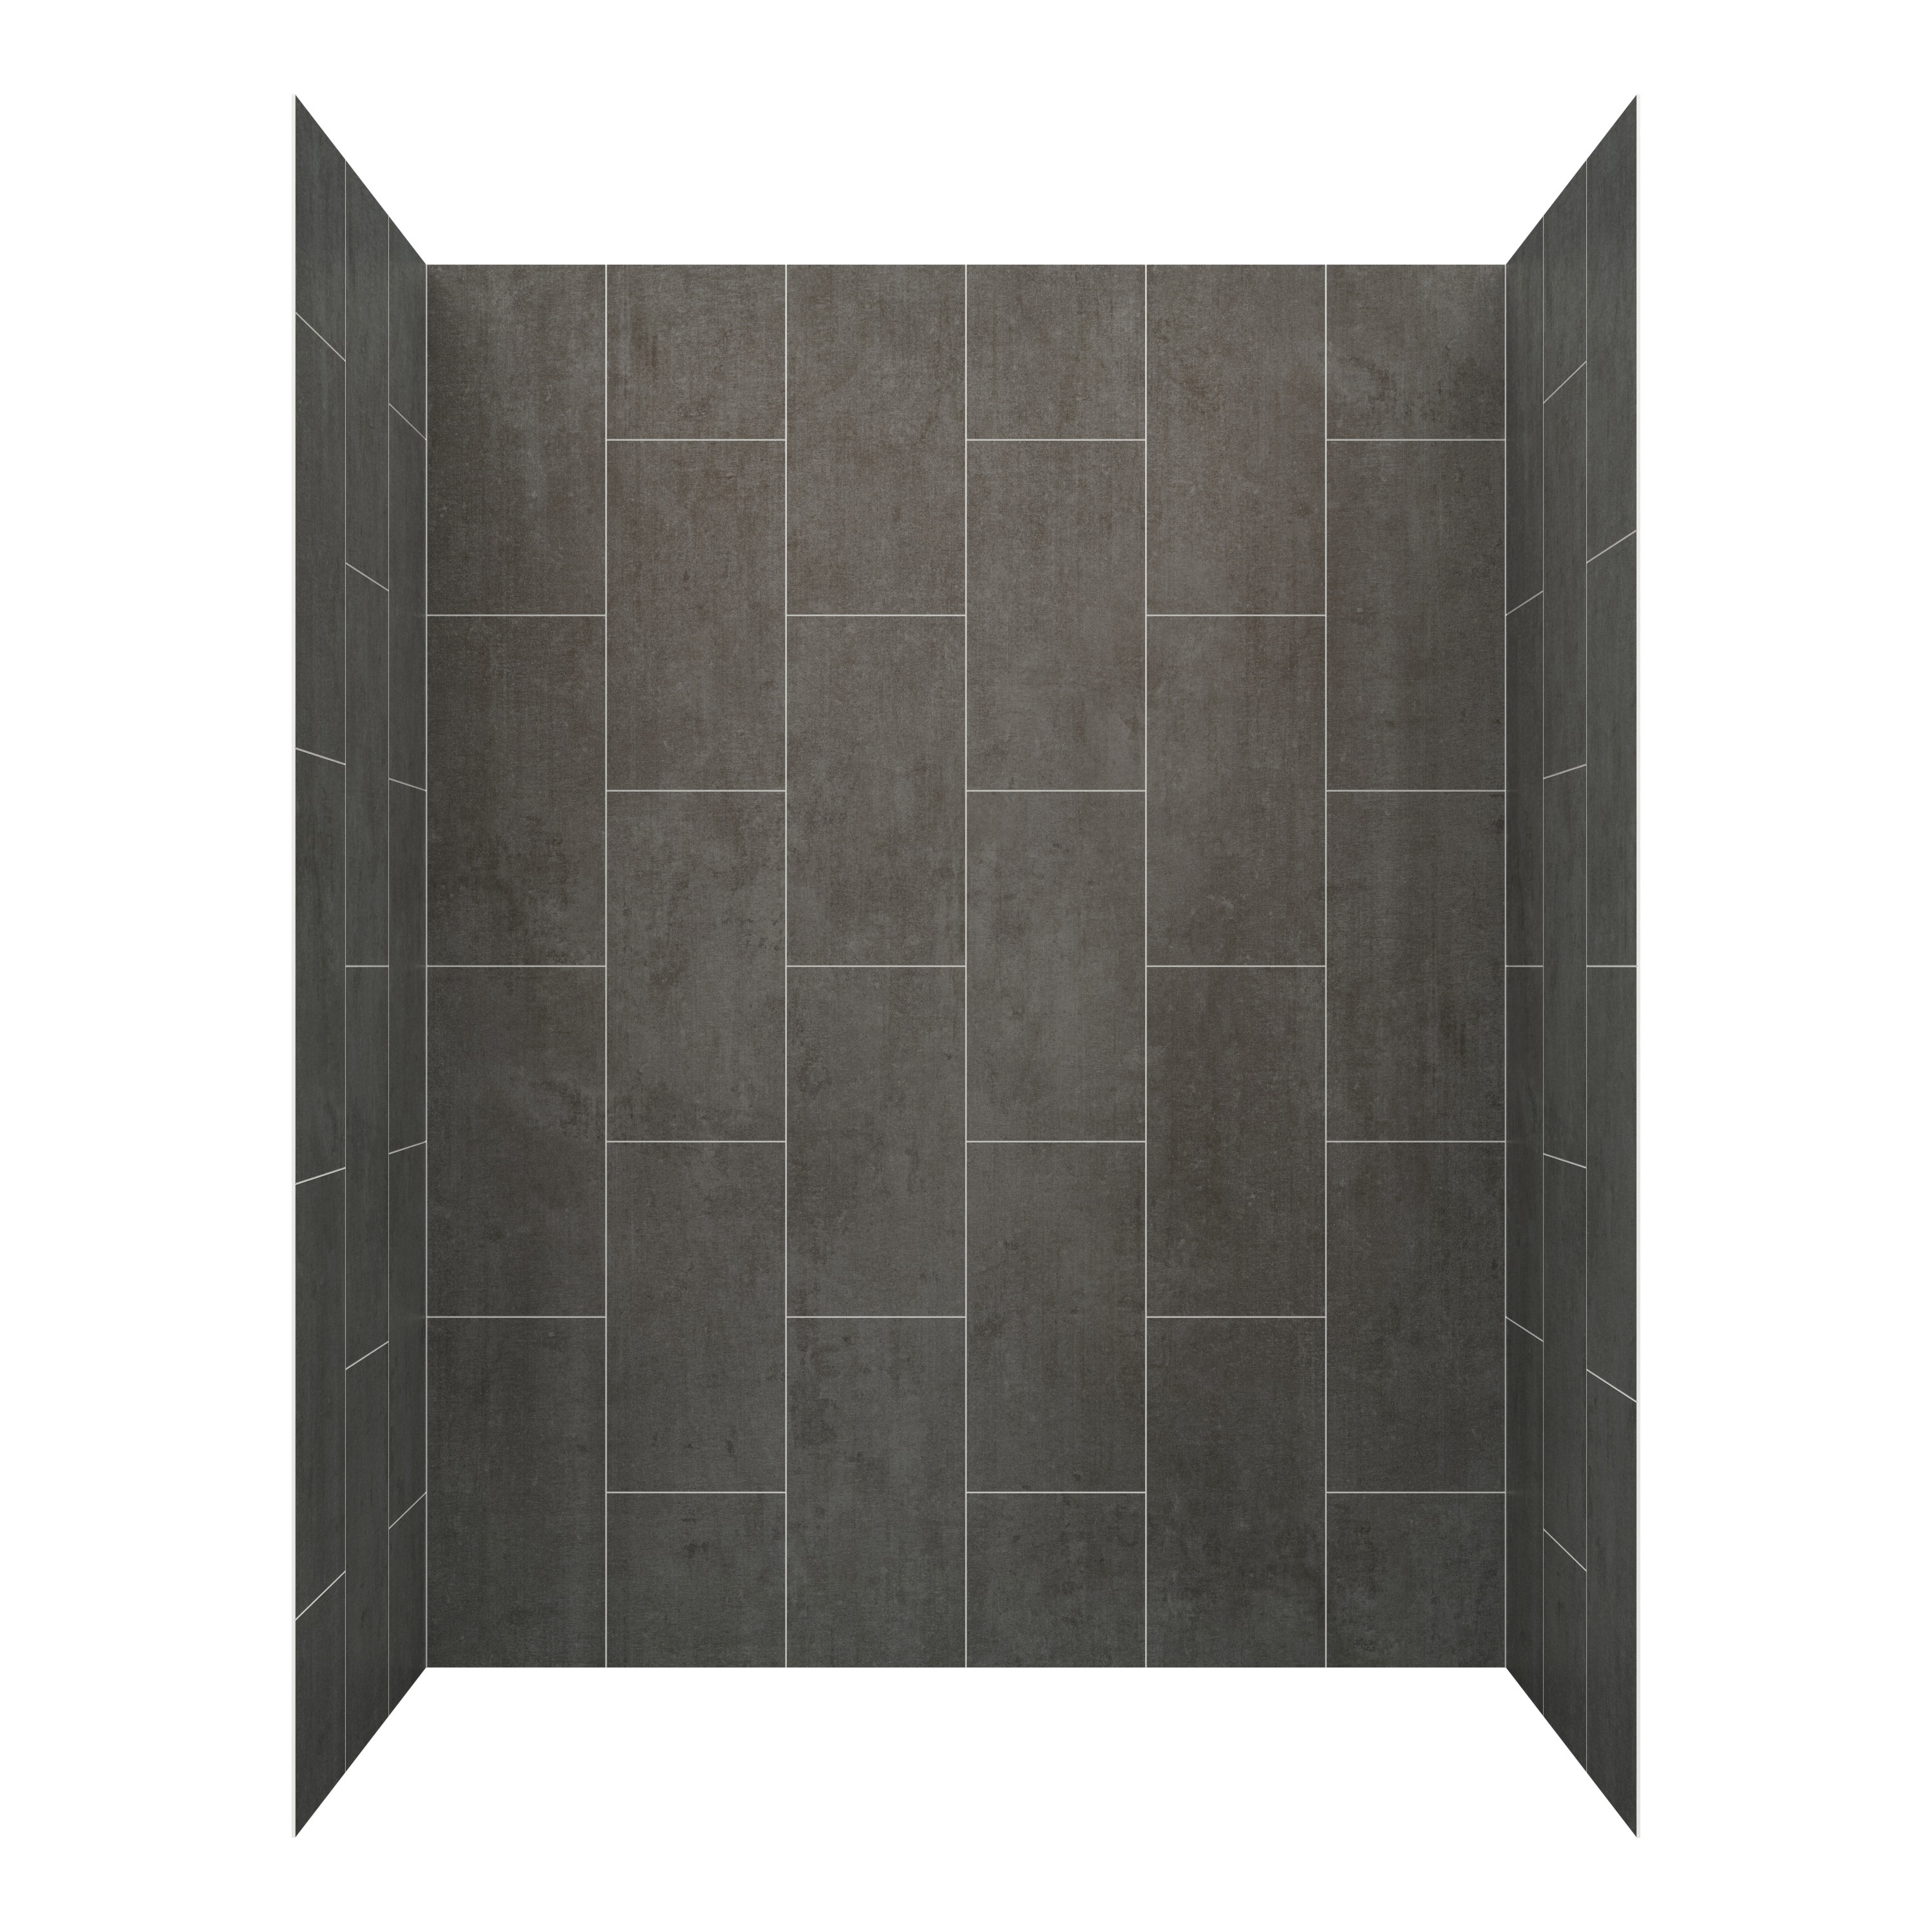 Thermal Stove/Wall Board, Floor Protector, Slate, 28 x 32-In.